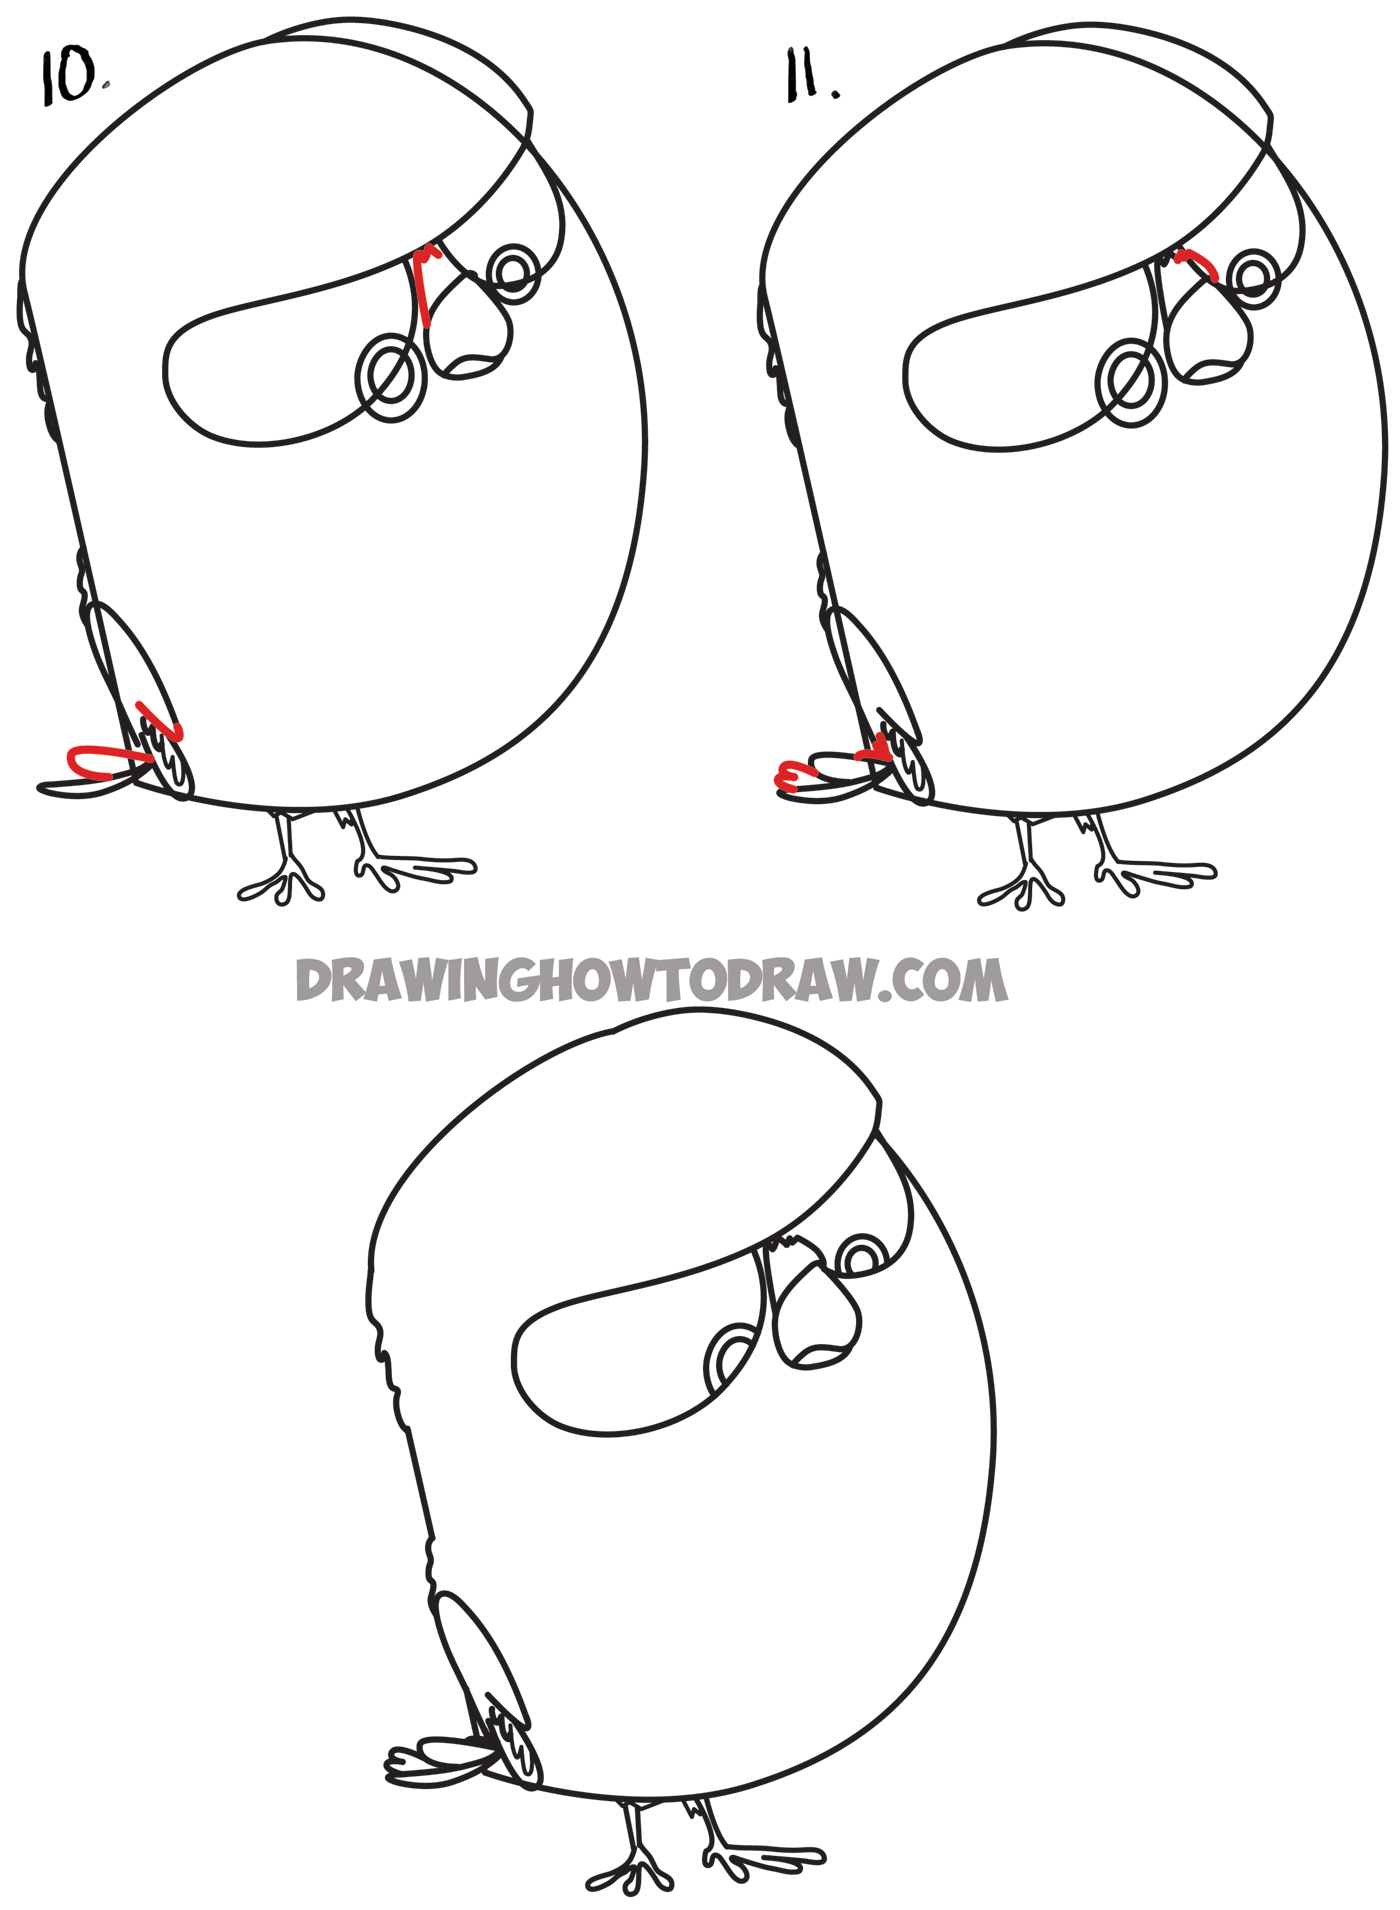 How to Draw Sweet Pea the Bird from The Secret Life of Pets - Drawing Tutorial